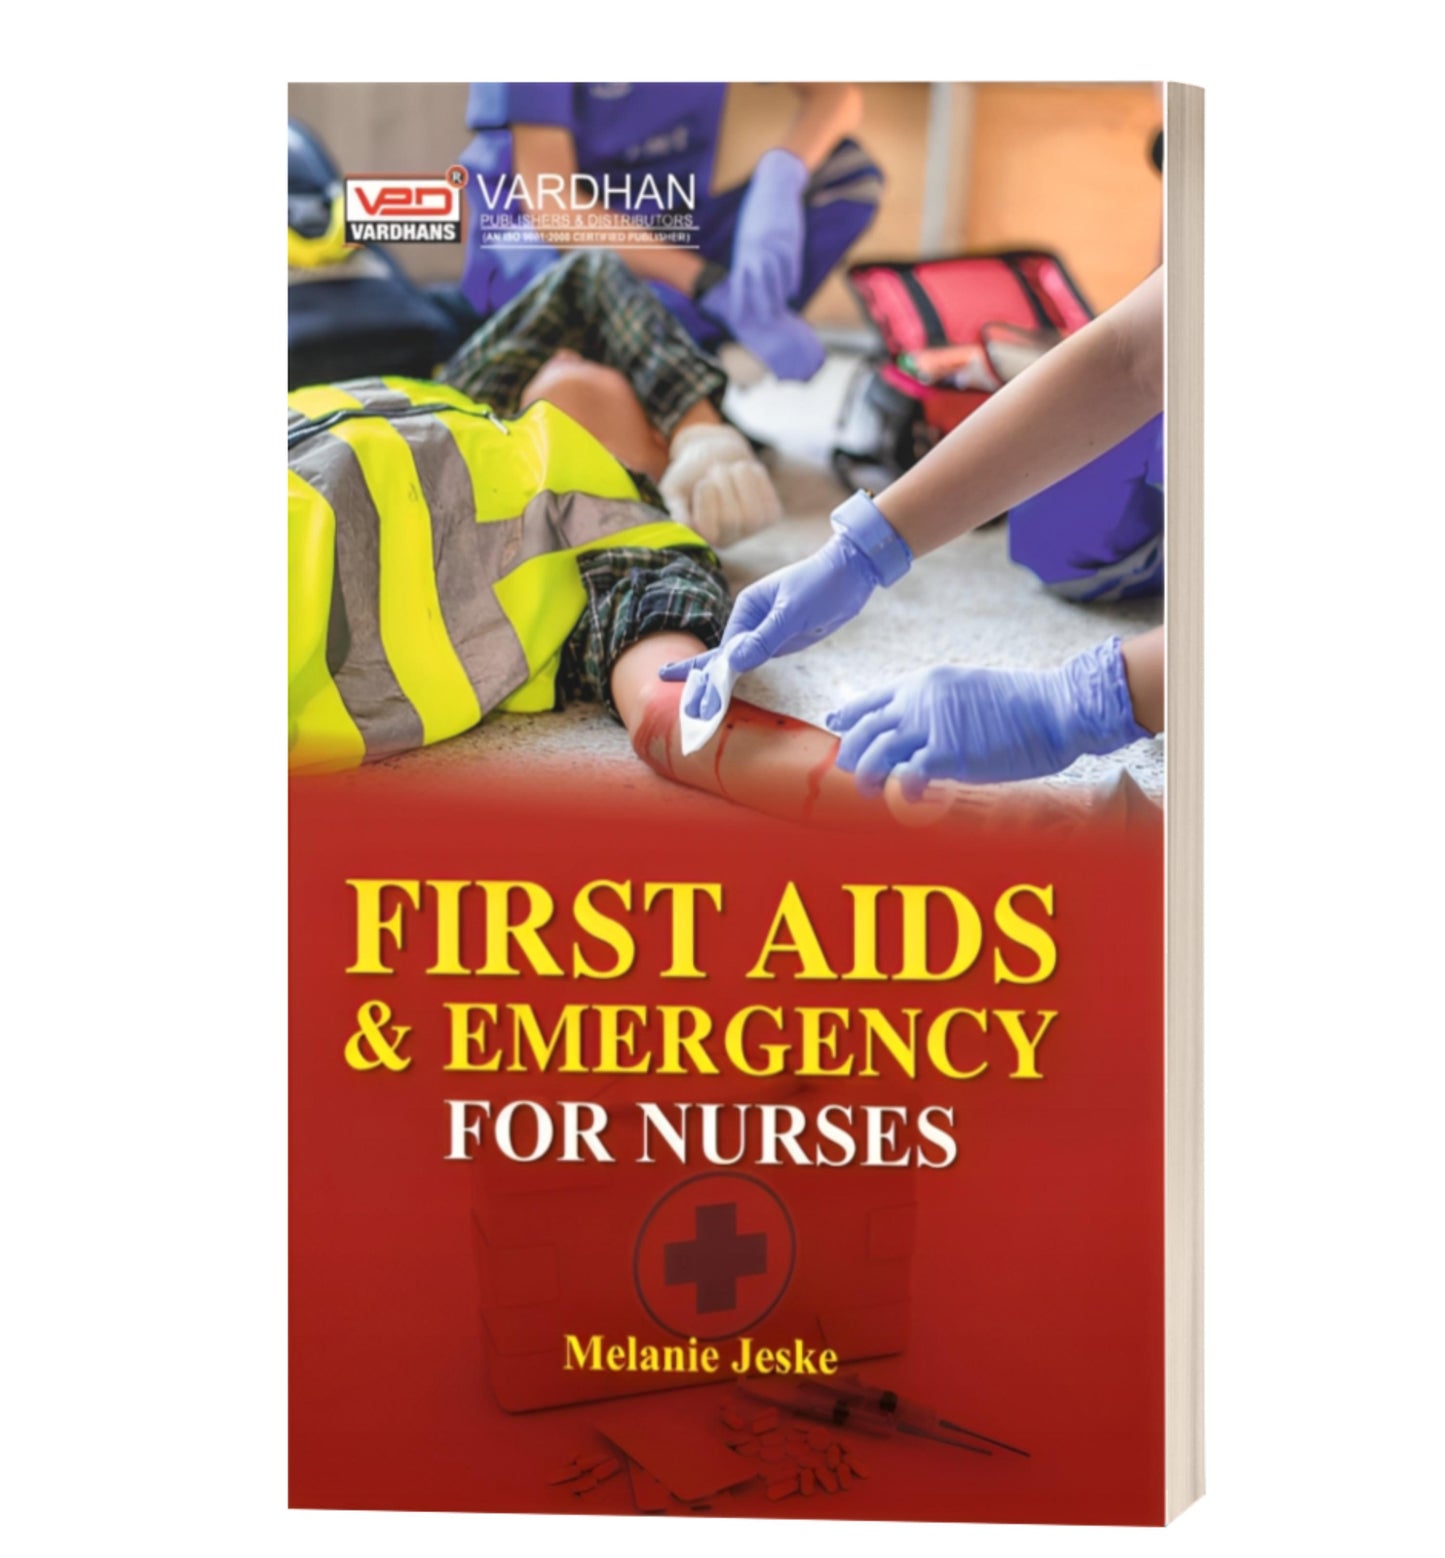 First Aids & Emergency for Nurses